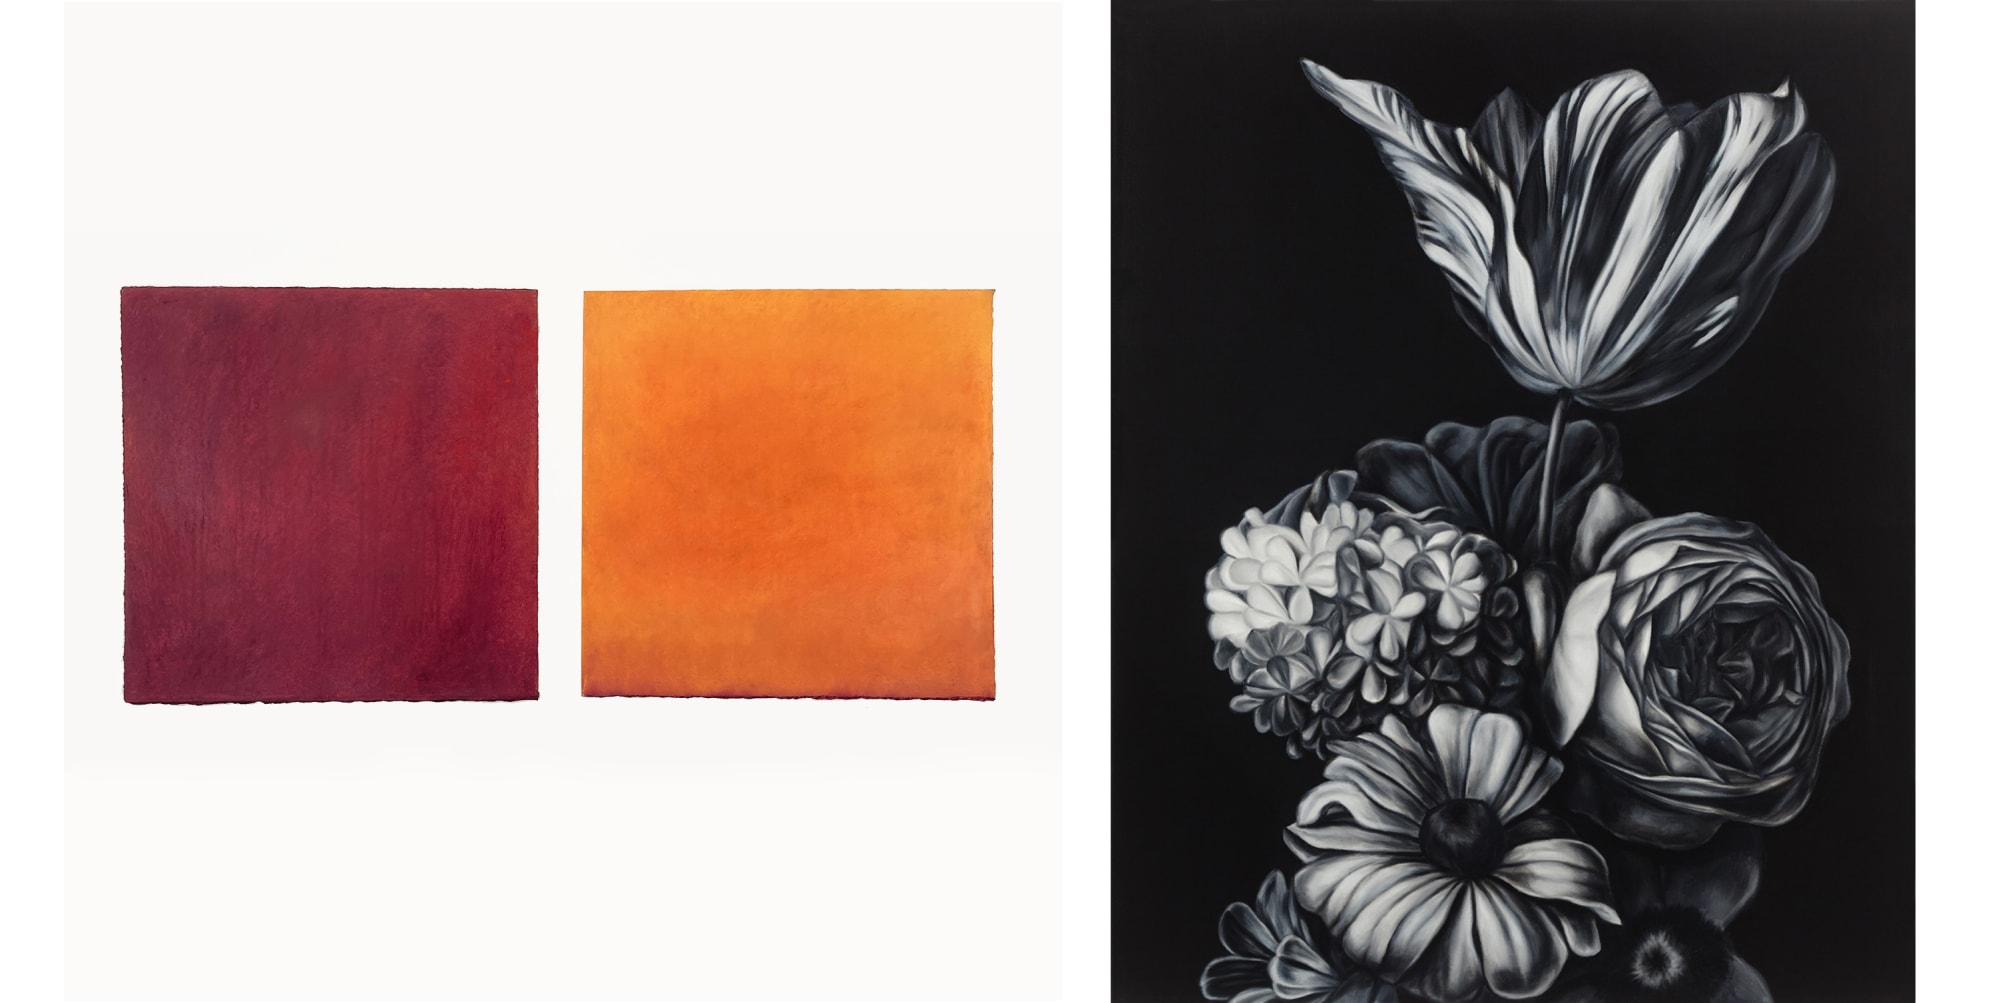 Concurrent exhibitions: Daisy Craddock and Shelley Reed